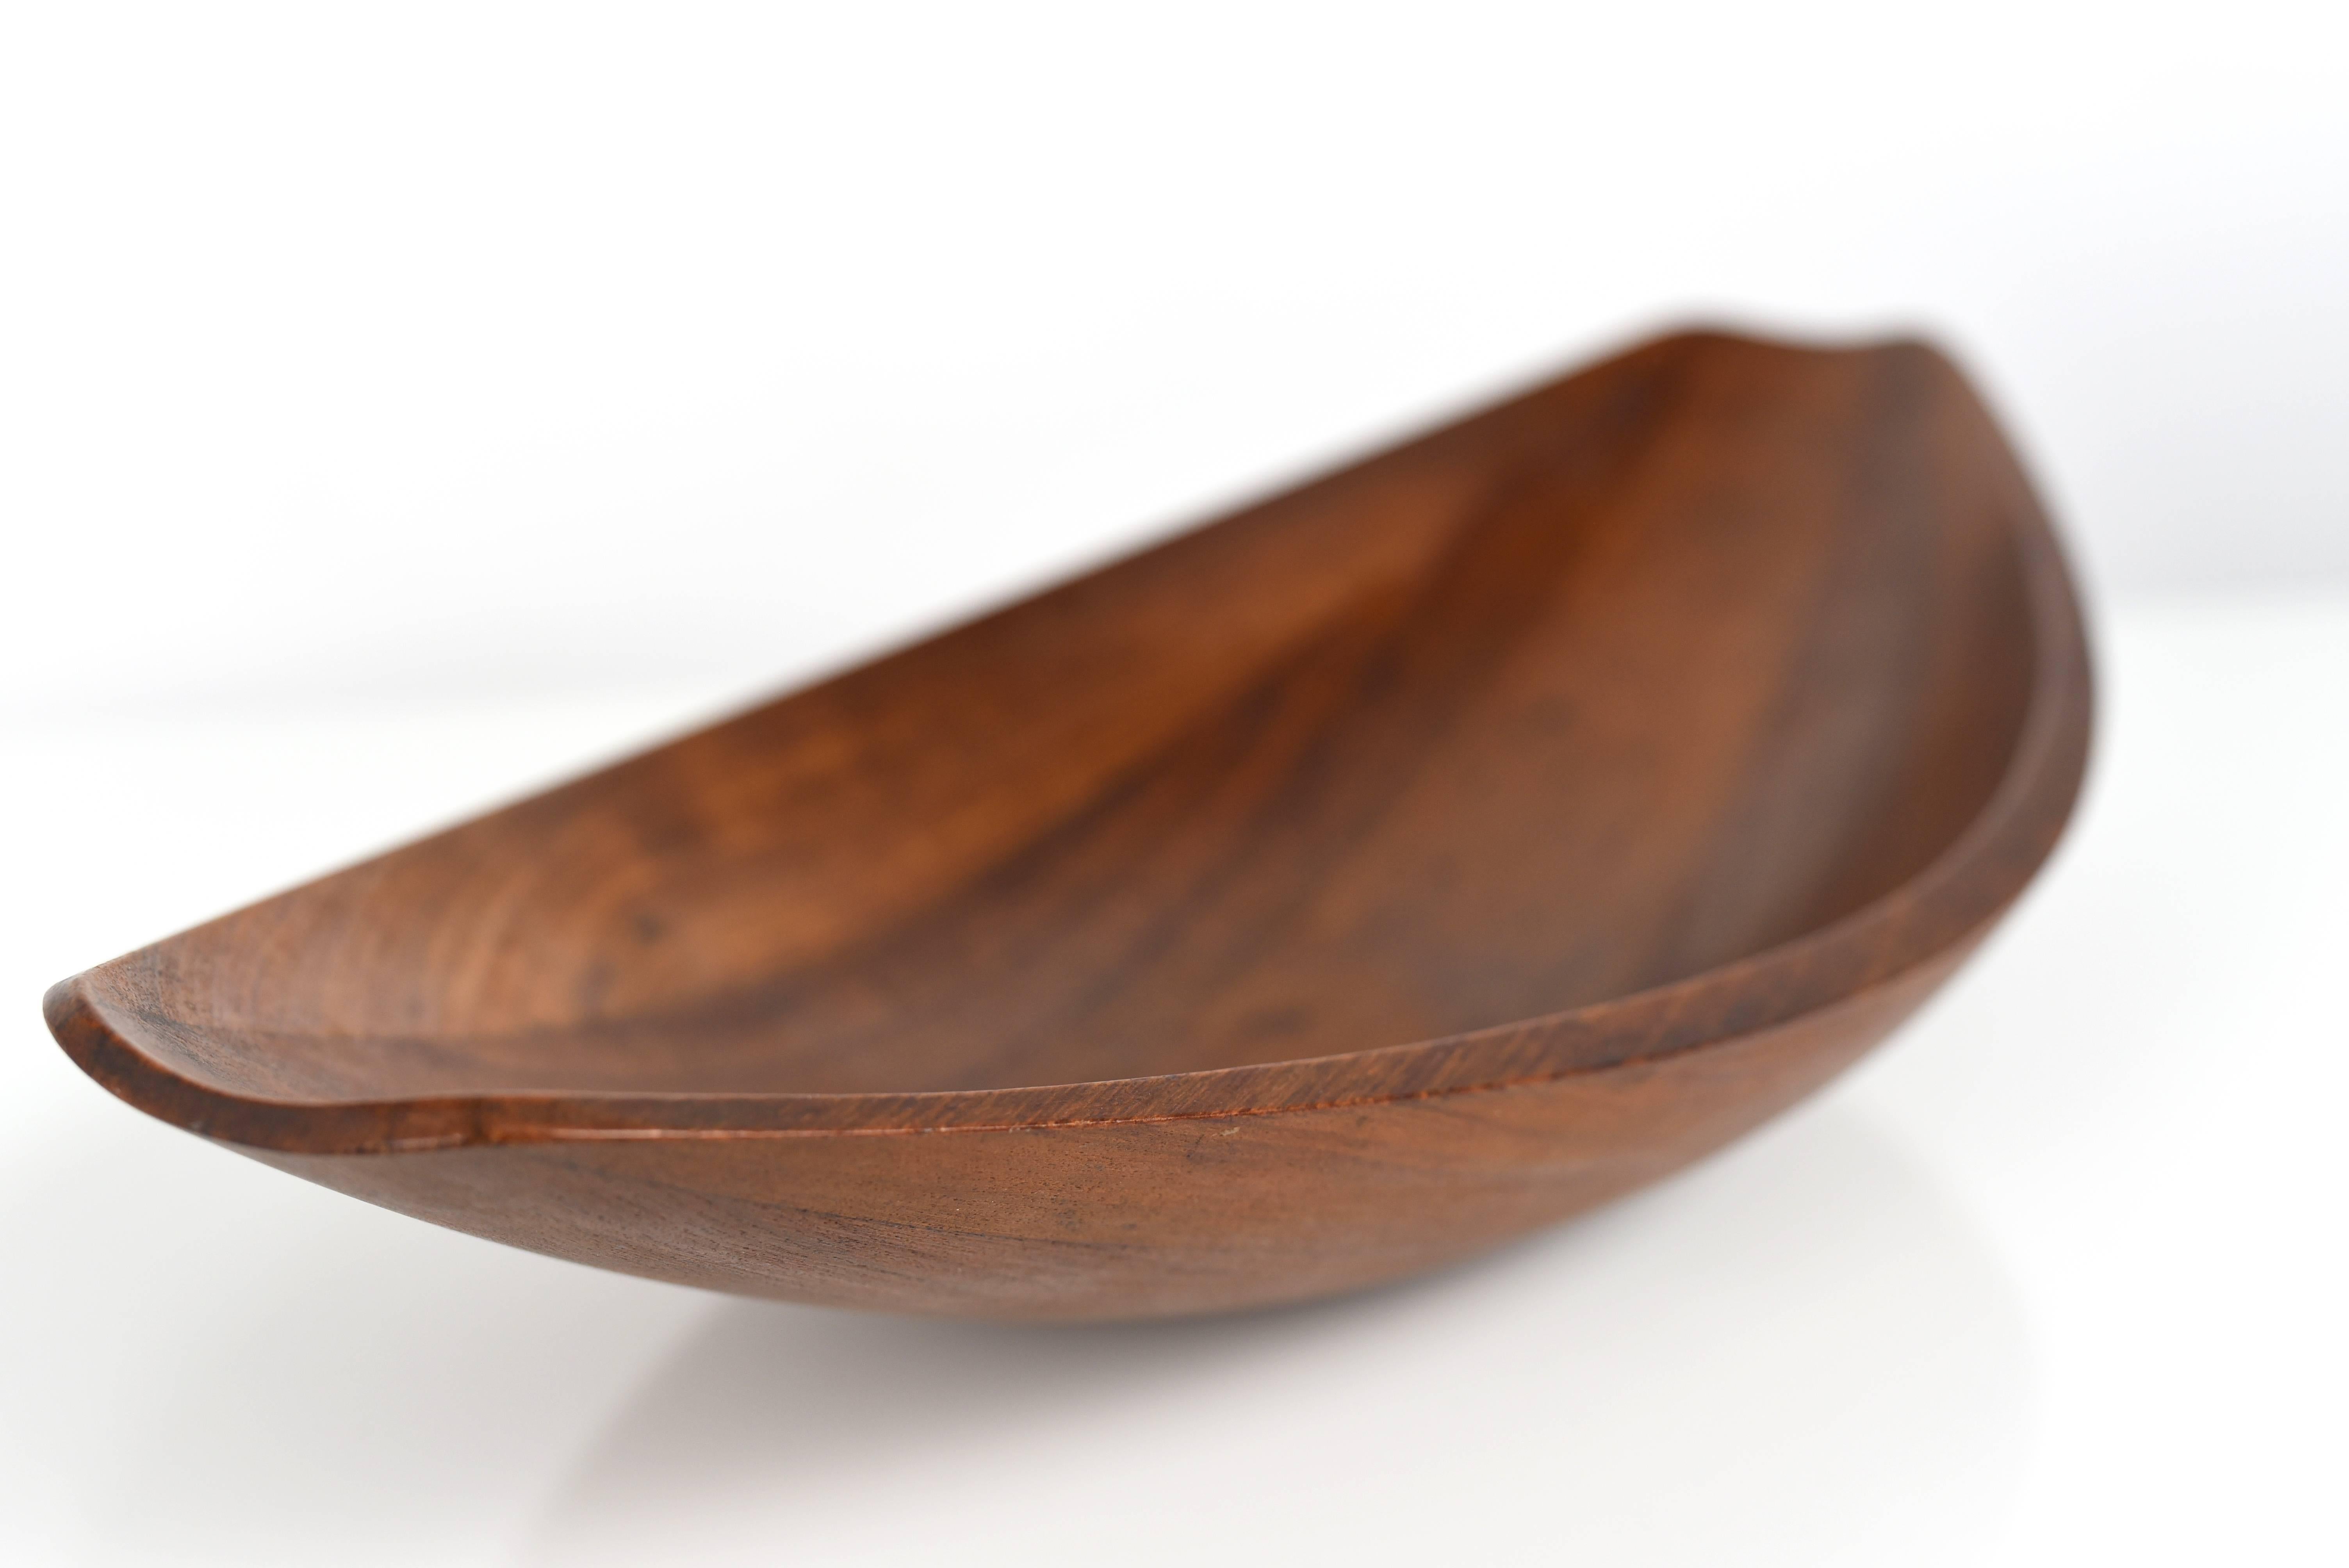 Danish Jens H Quistgaard Canoe Bowl by Dansk, First Generation with Early Markings